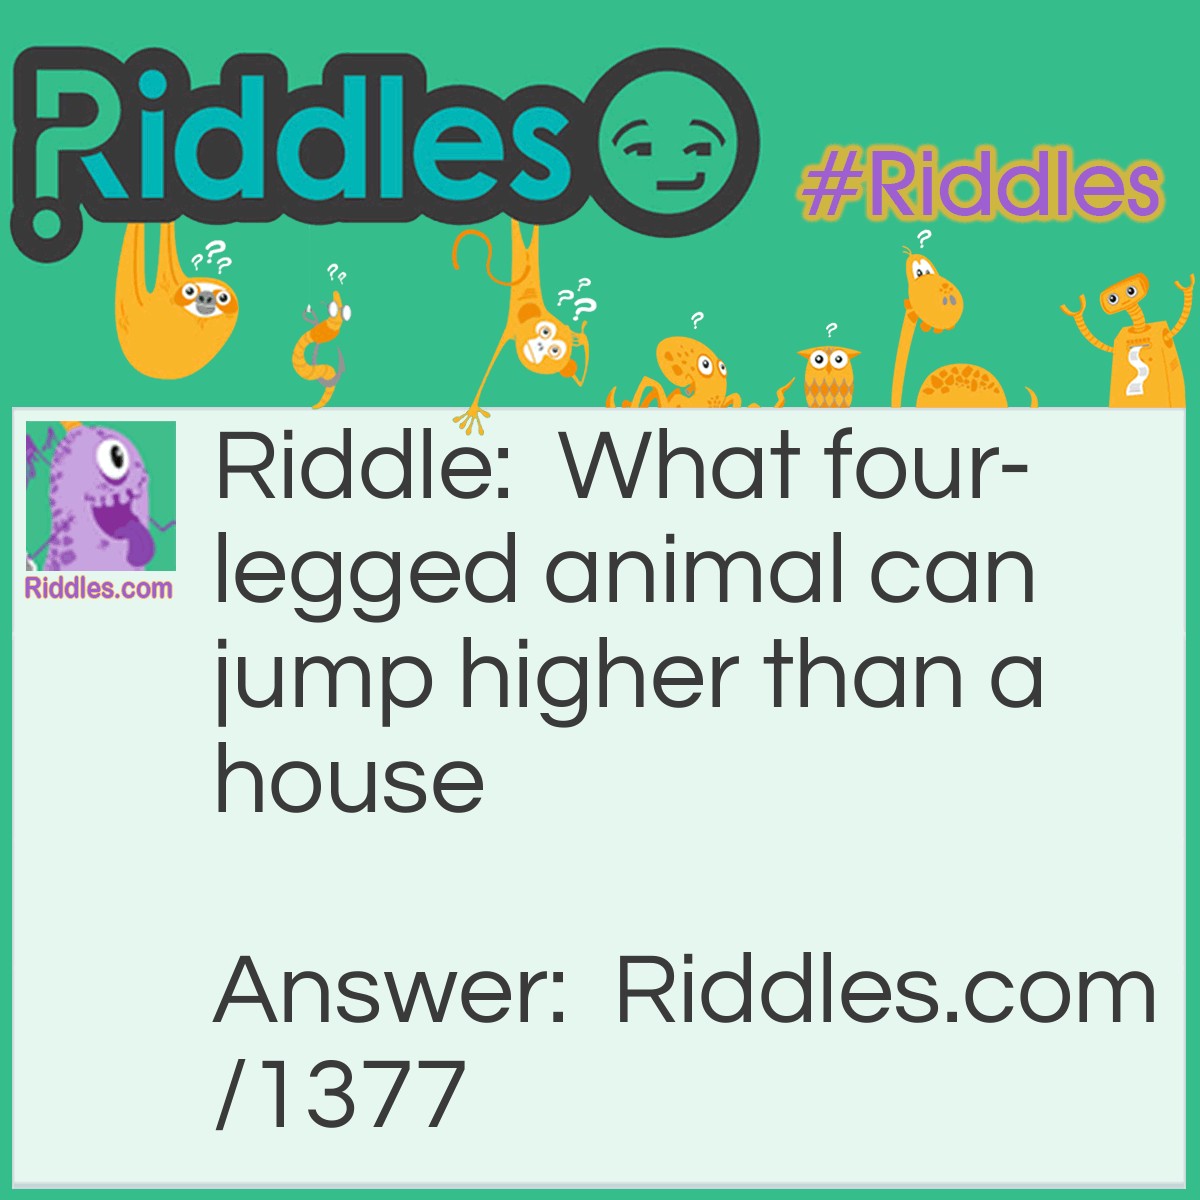 Riddle: What four-legged animal can jump higher than a house? Answer: Any a house can't jump.